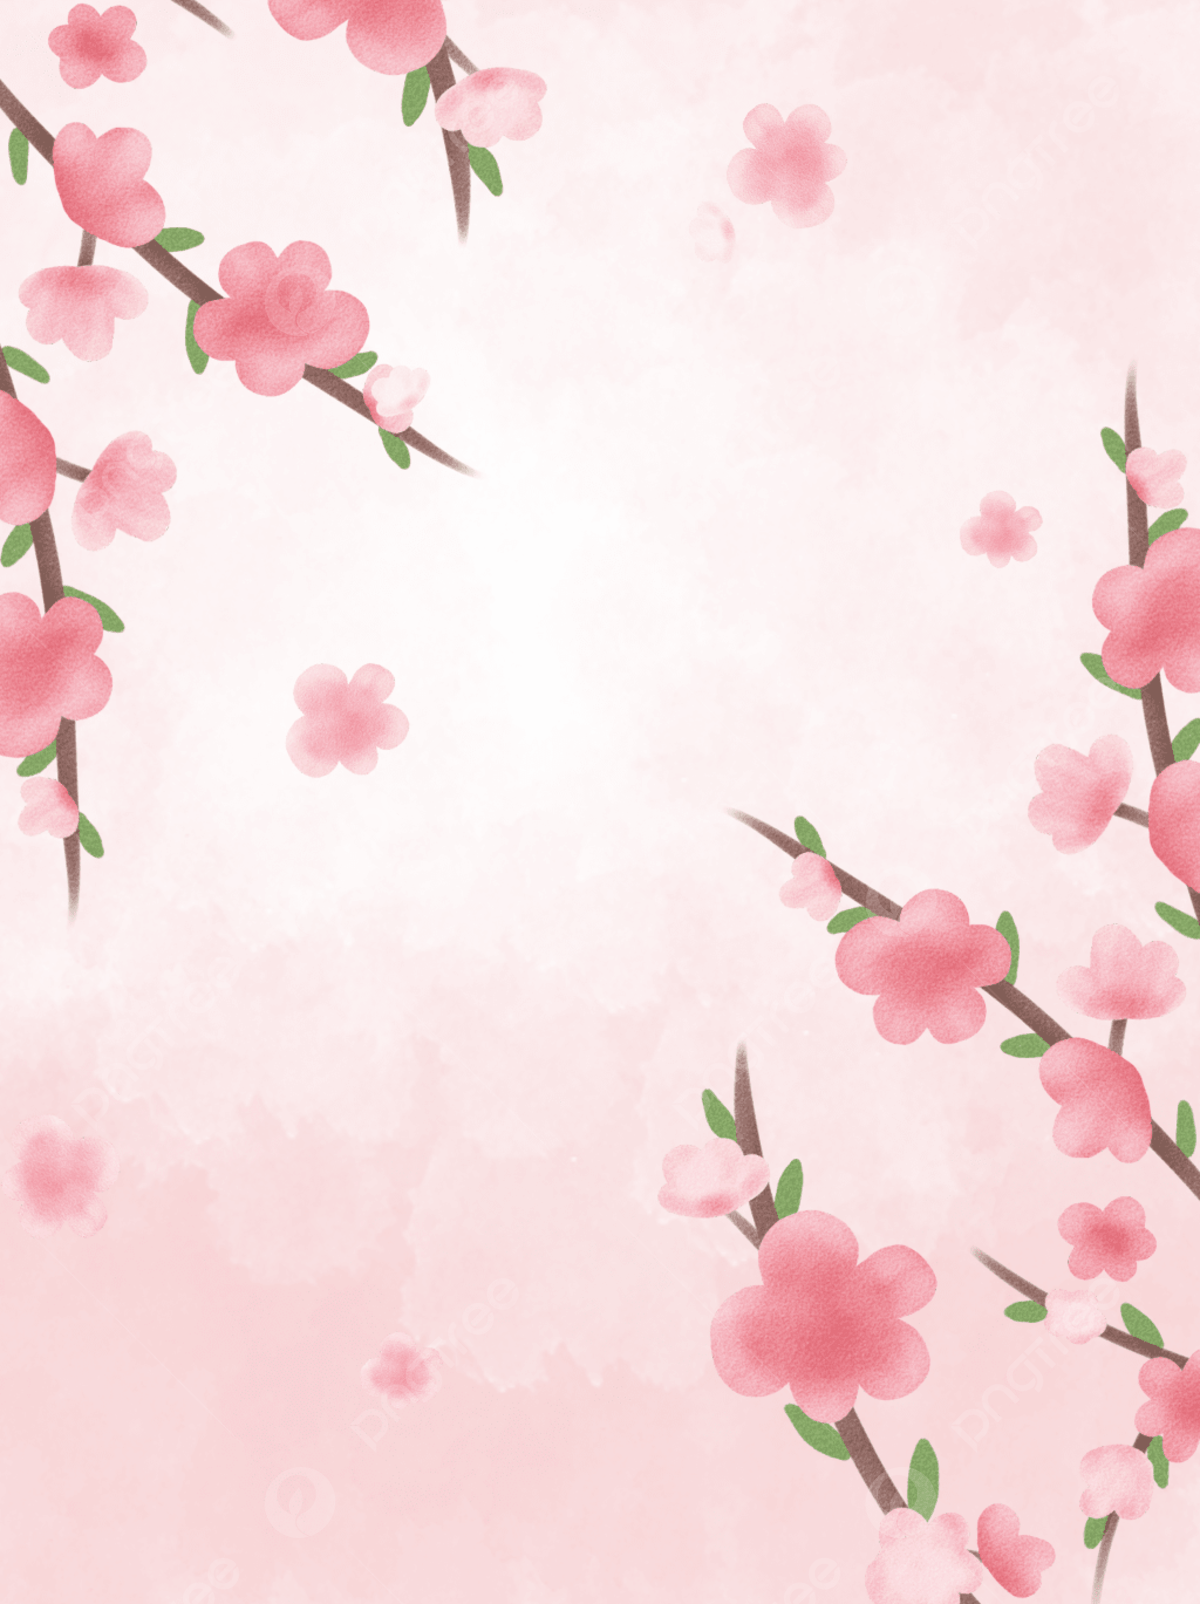 Romantic And Aesthetic Cherry Blossom Festival Background Wallpaper Image For Free Download